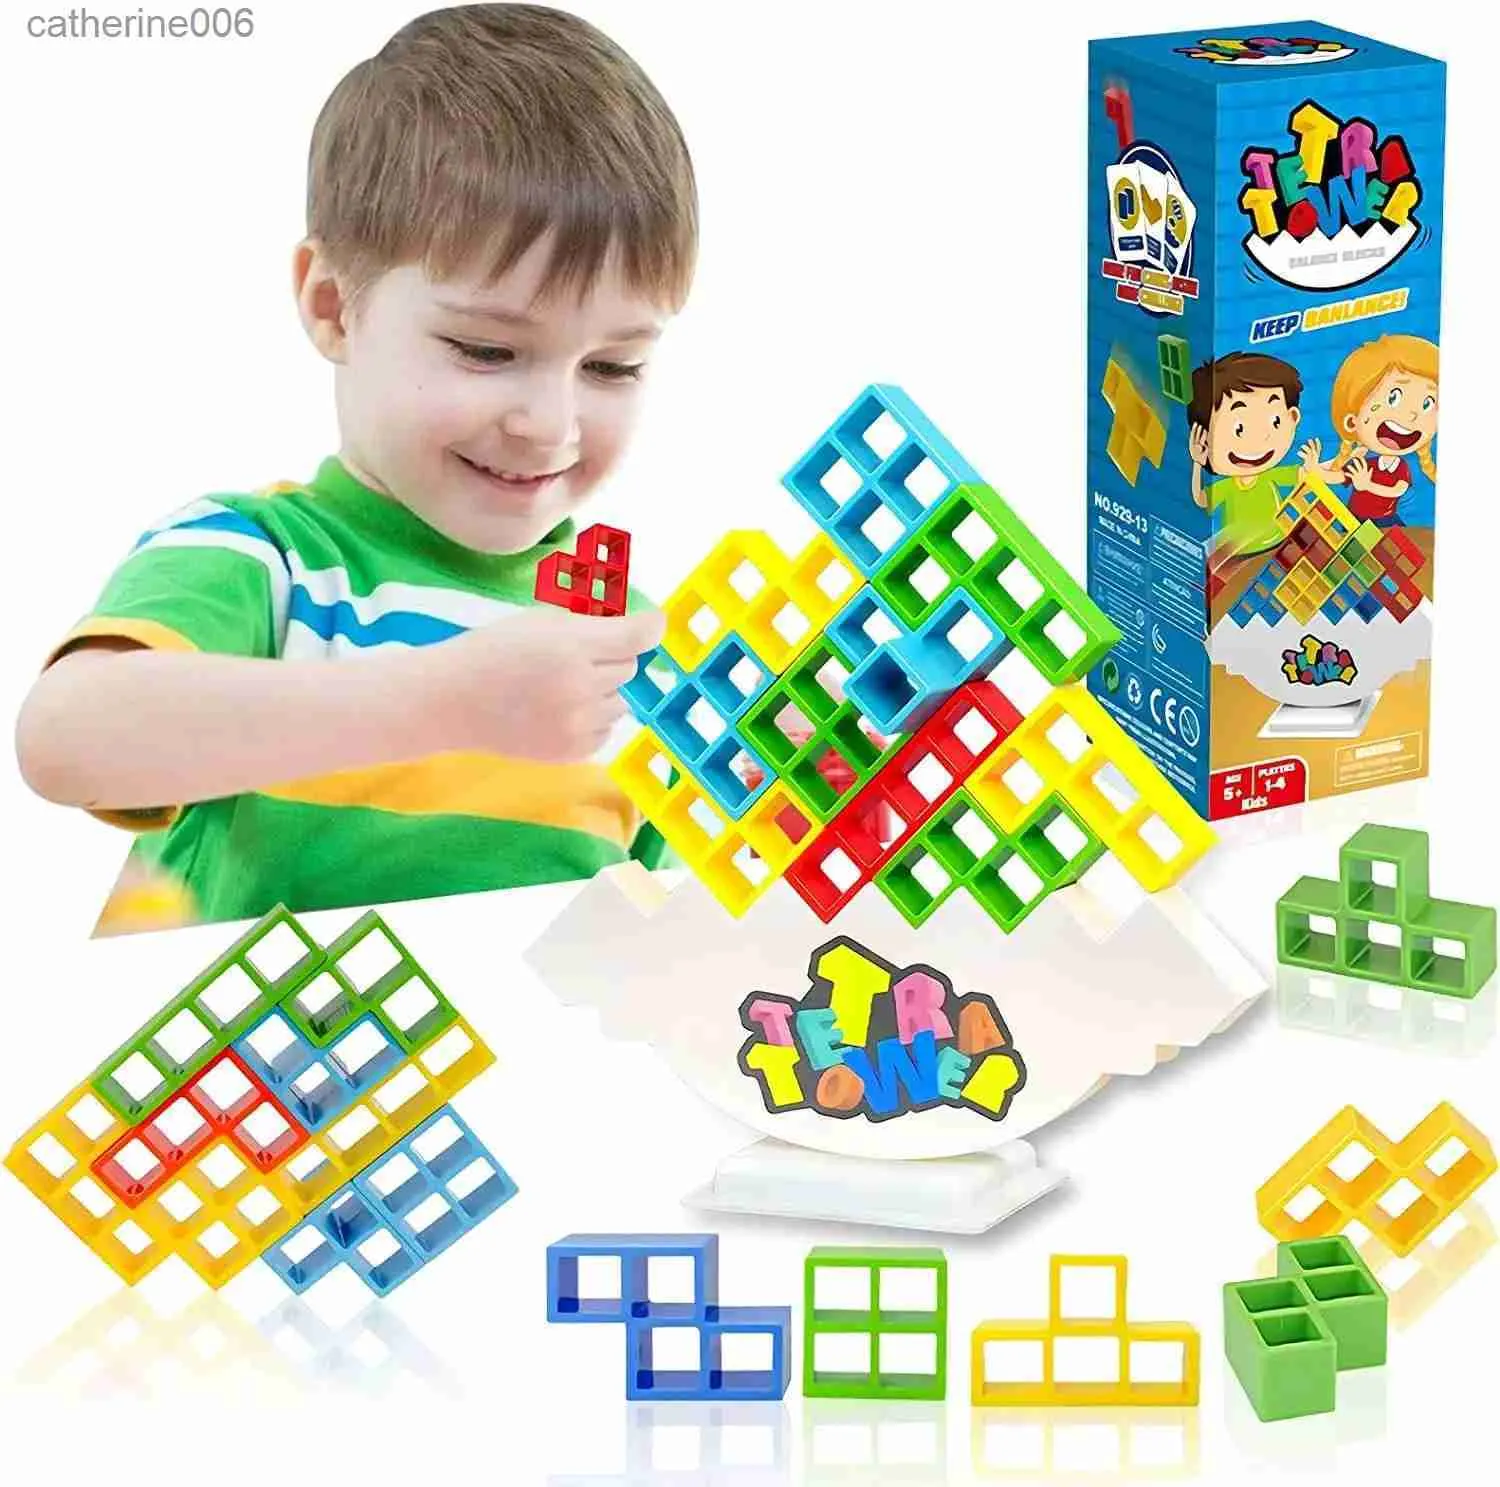 Wooden Stacking Blocks Tetra Tower Balance Game Colorful Building